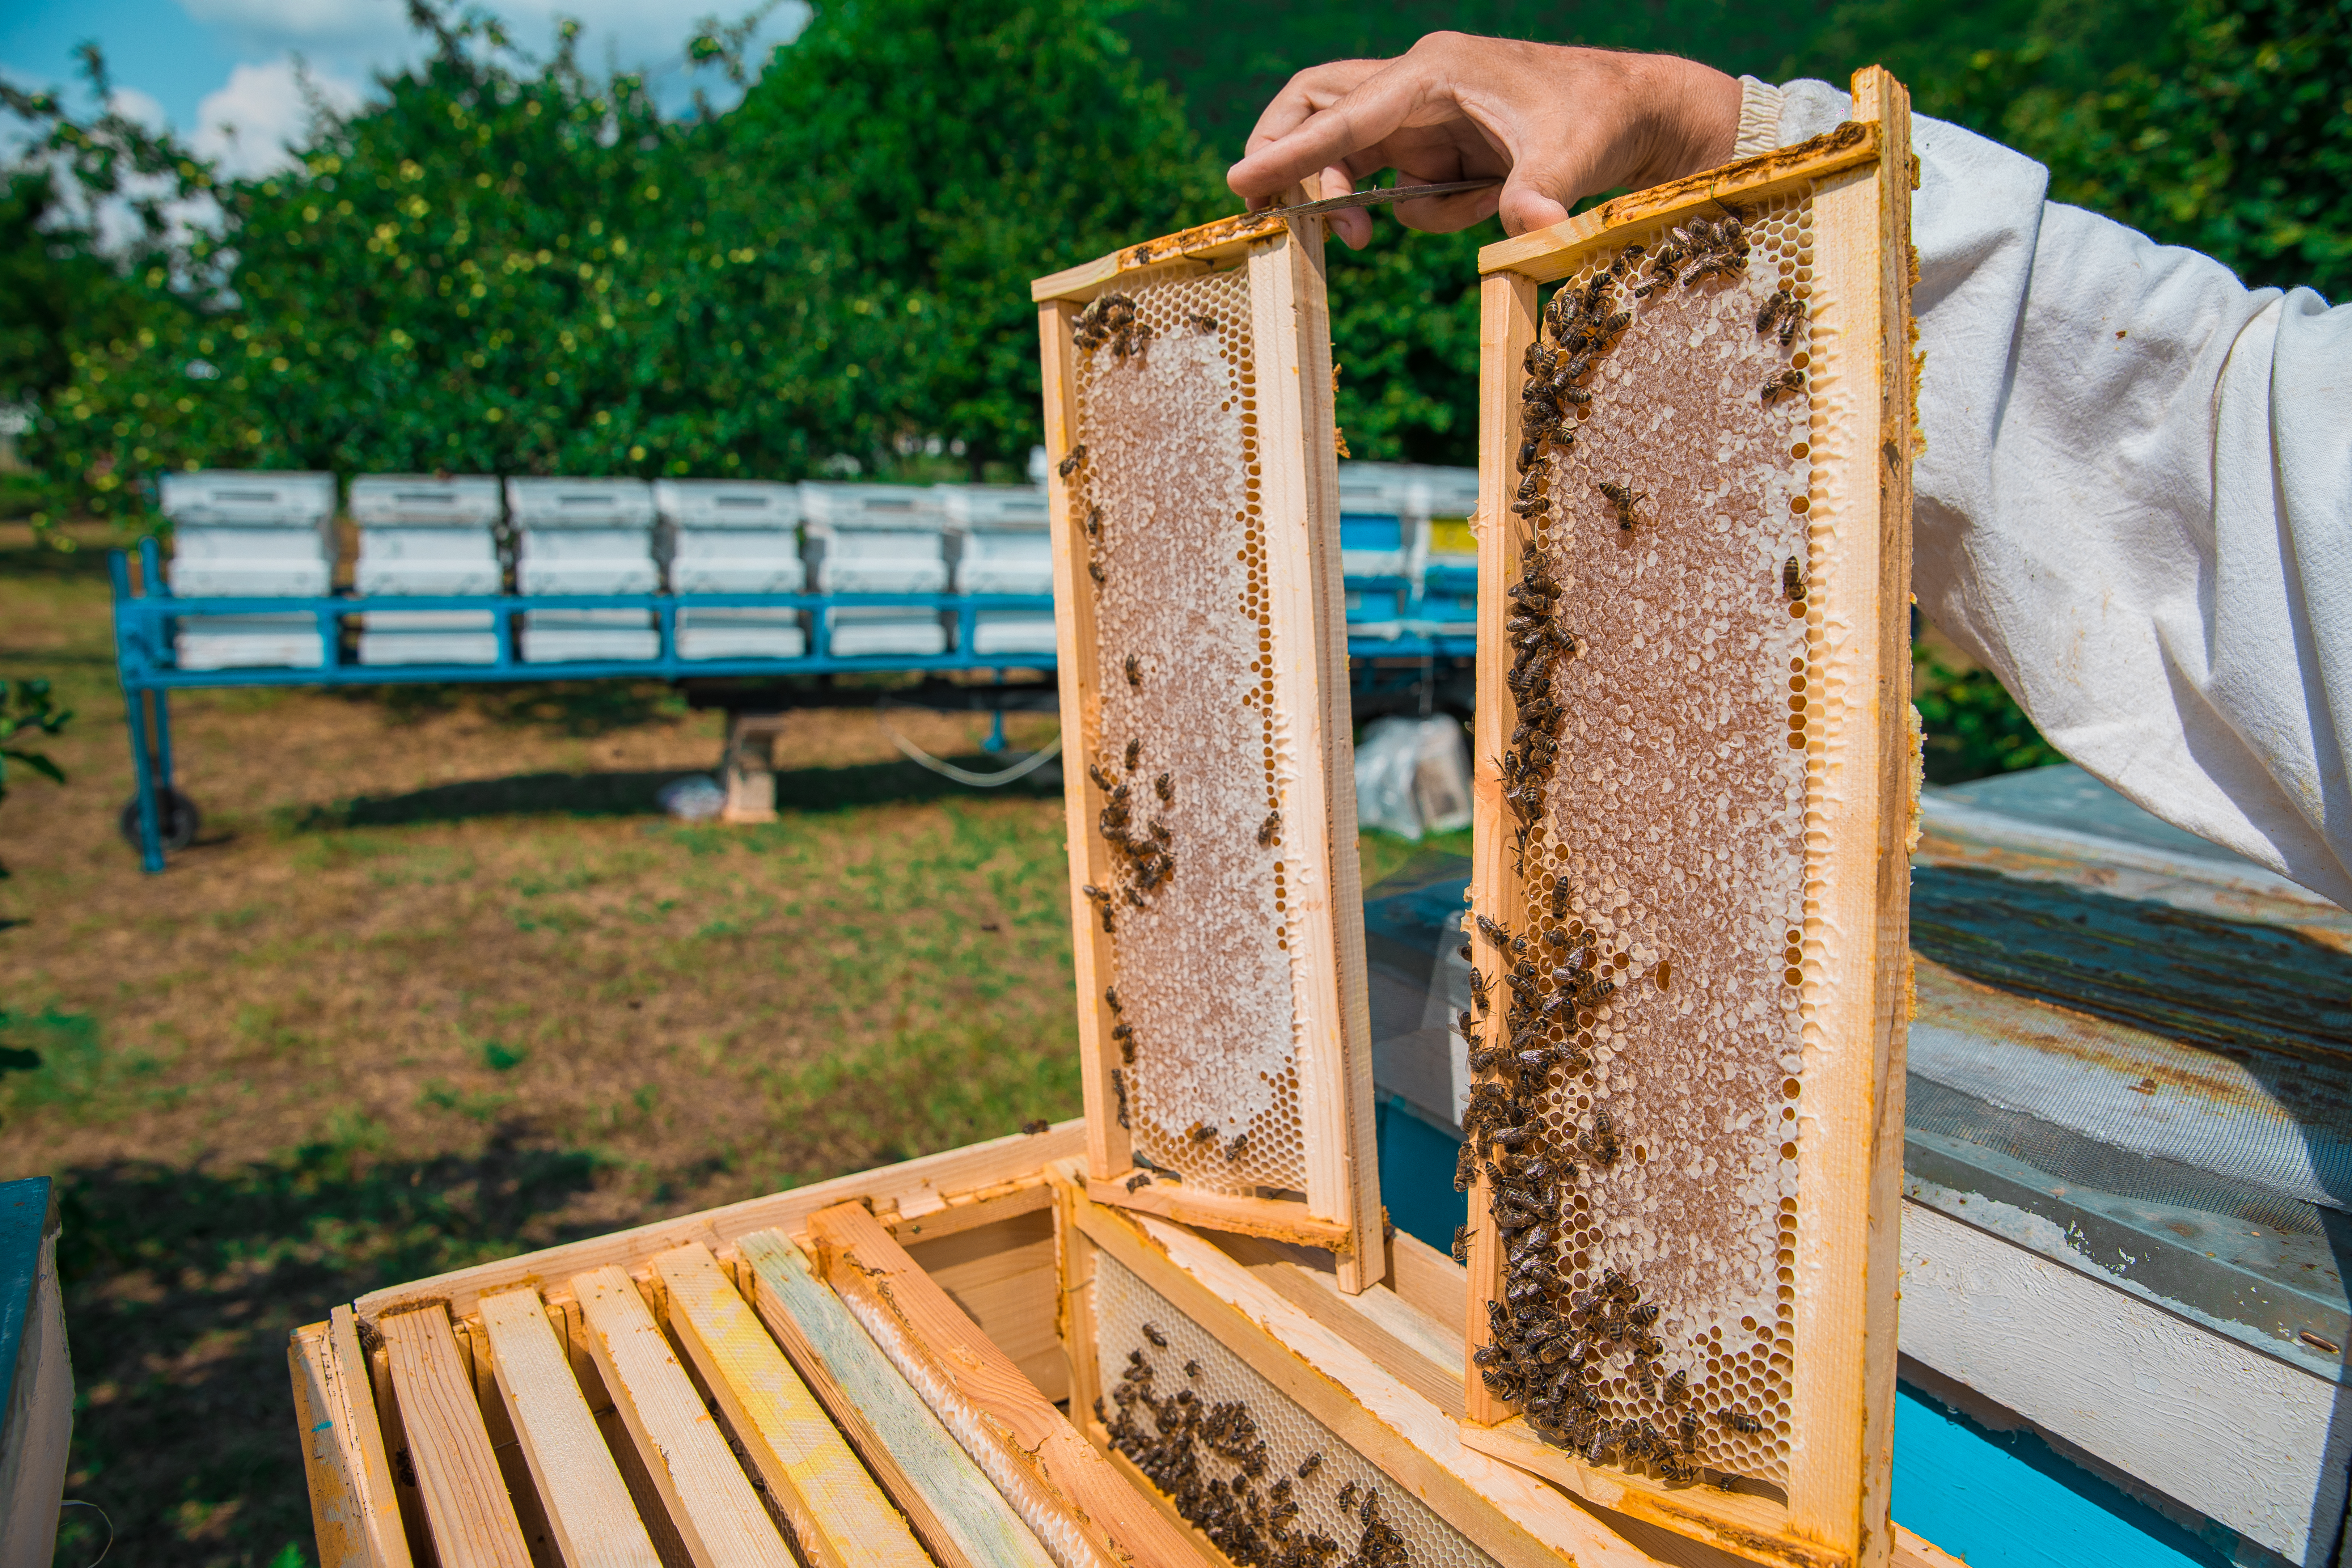 beekeeper-holding-bee-hives-with-honey-high-quality-photo